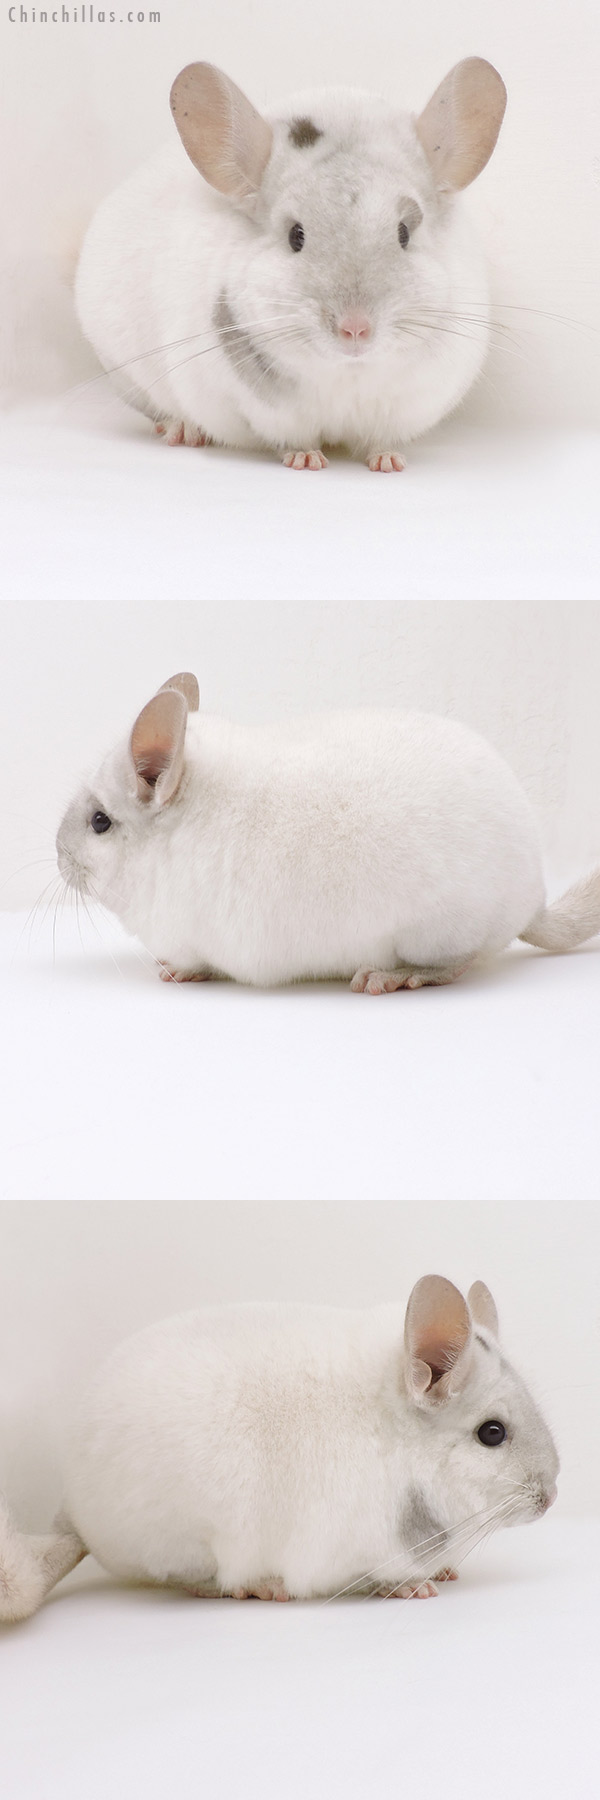 Chinchilla or related item offered for sale or export on Chinchillas.com - 19238 Premium Production Quality Unique Beige and White Female Chinchilla